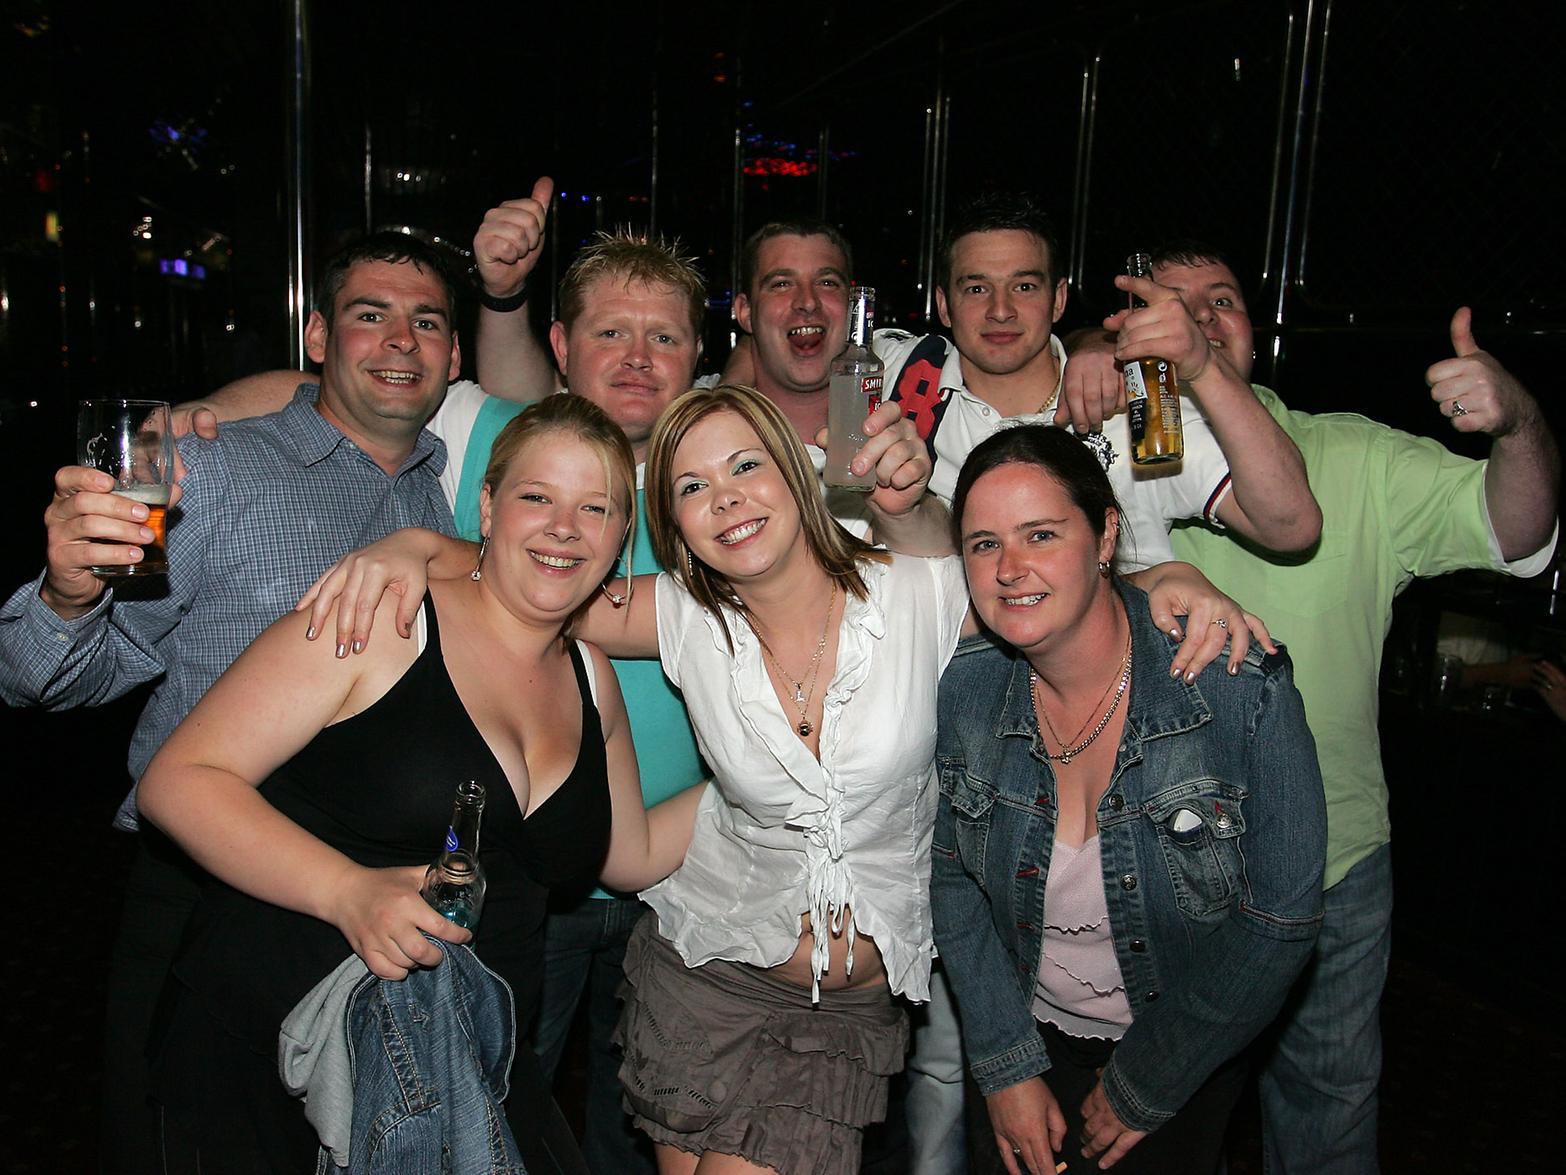 Enjoy these memories from The Frontier - do you recognise anyone?